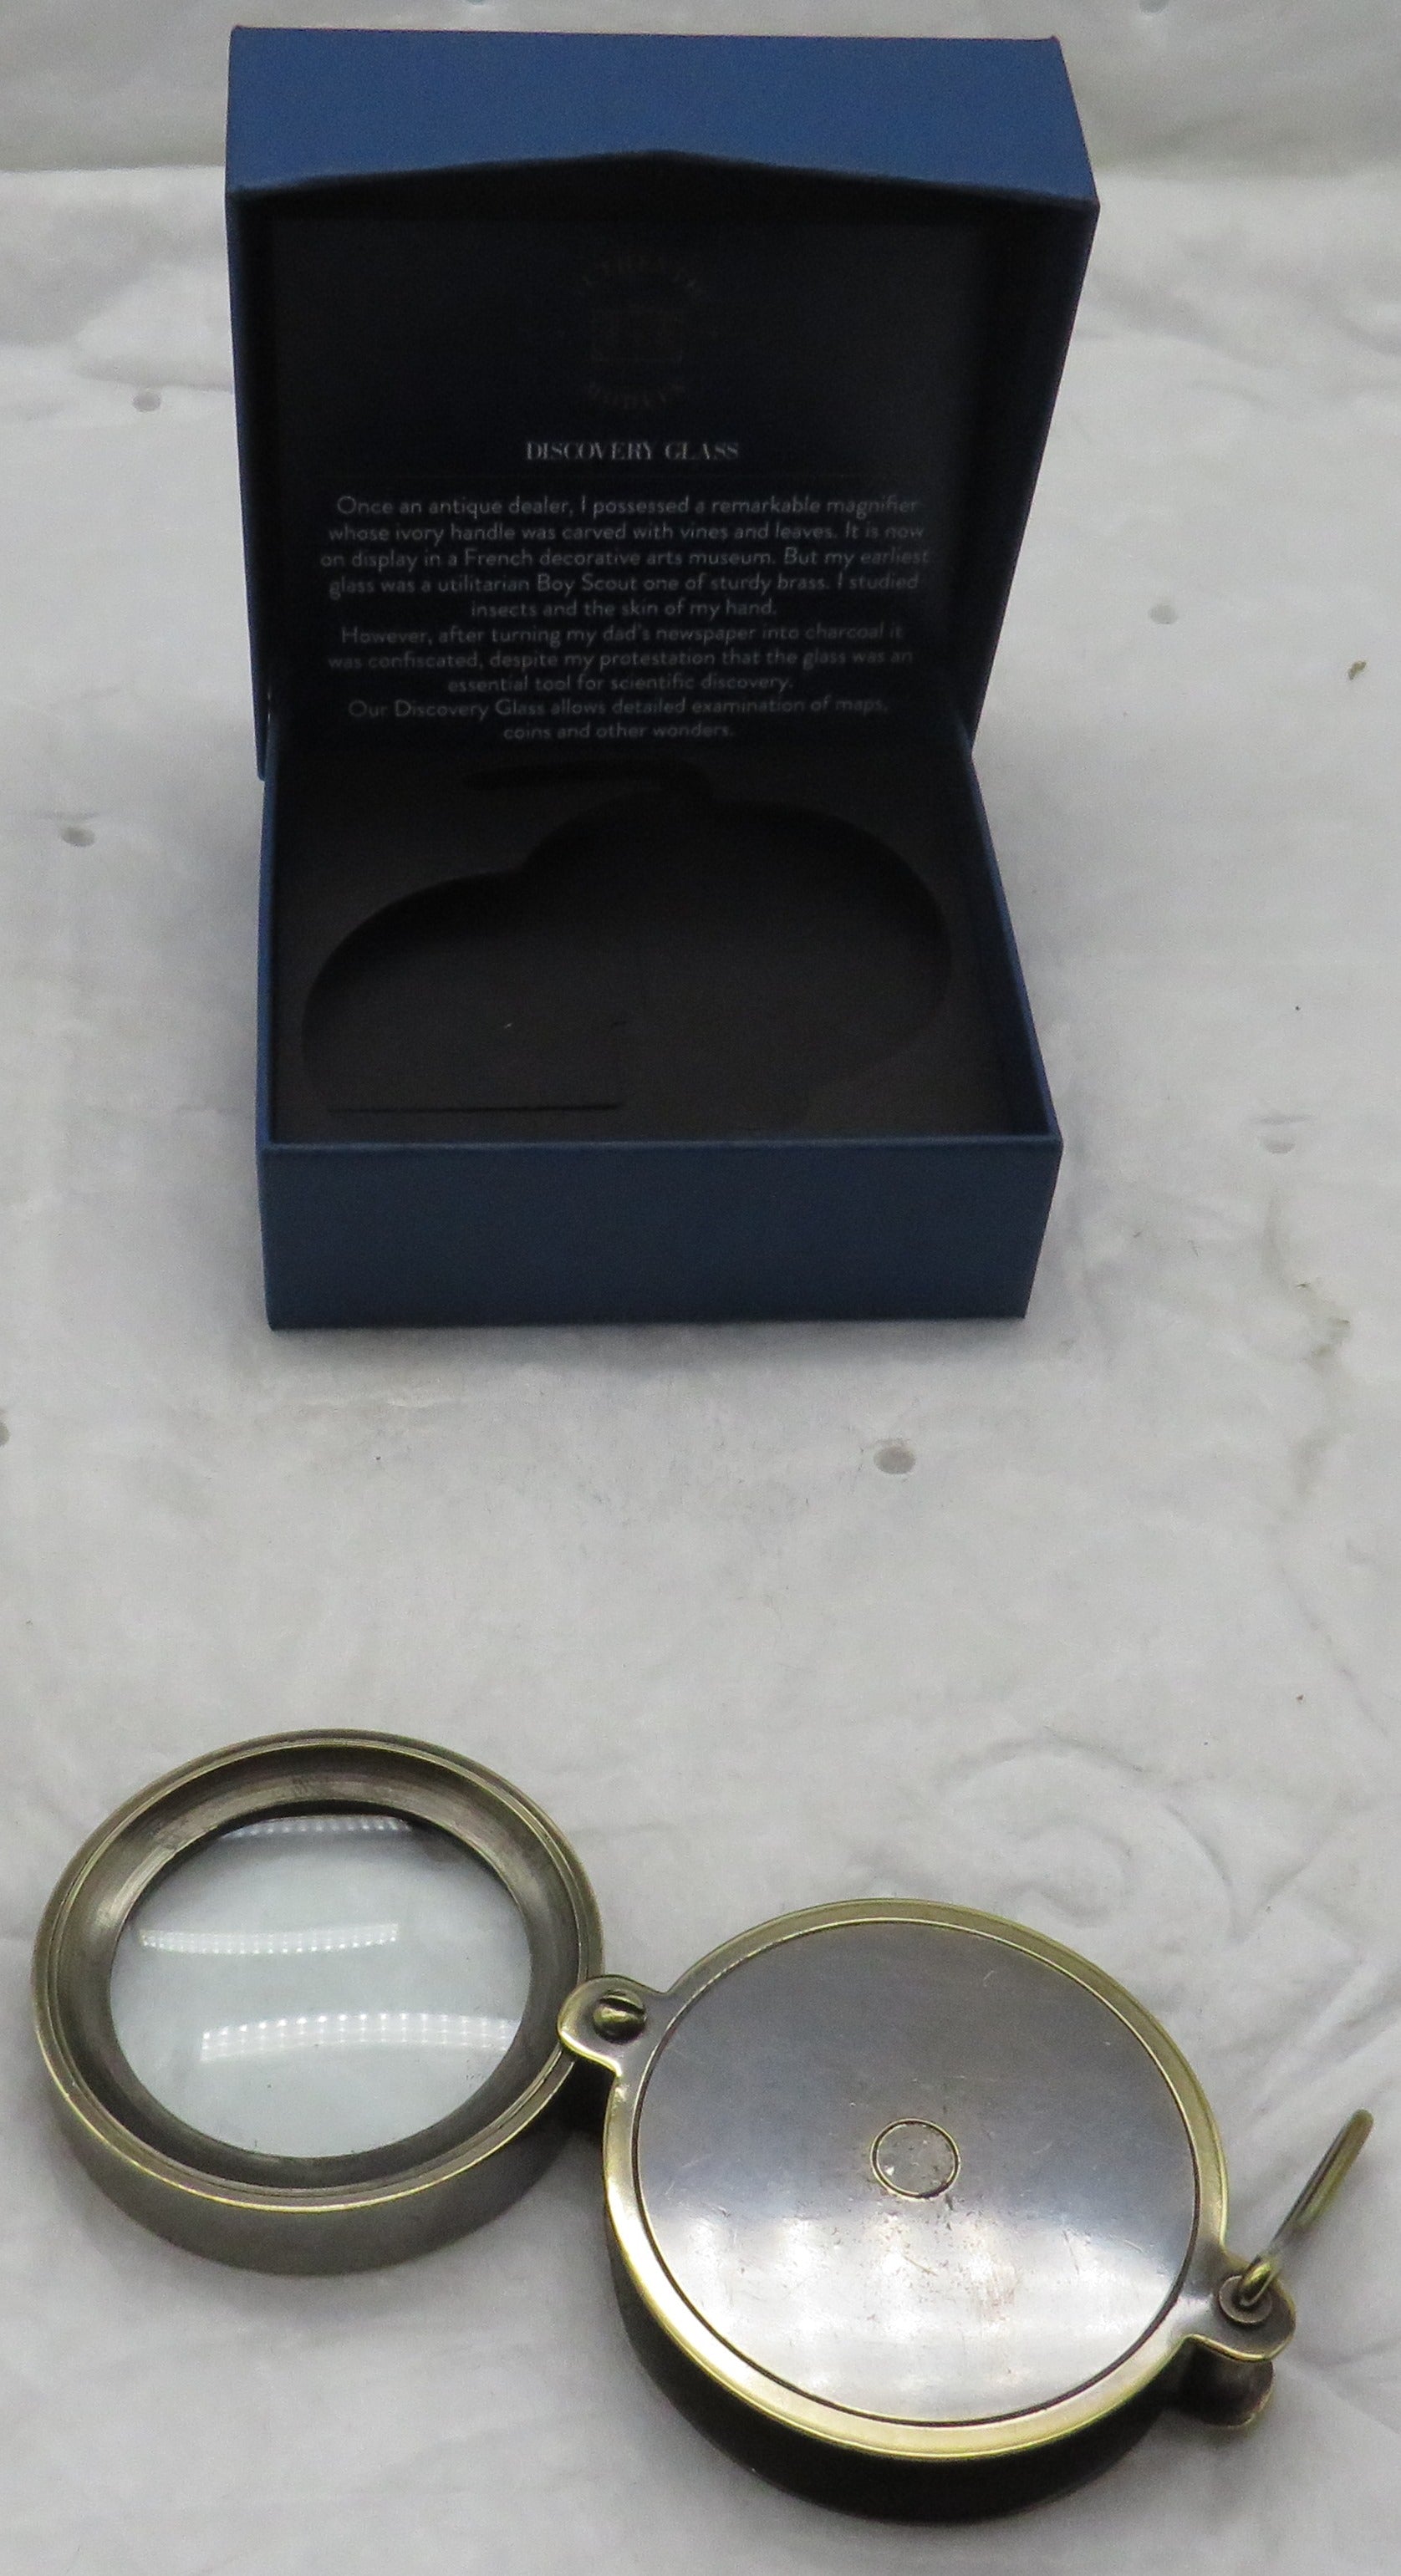 Authentic Models Magnifier Discovery Glass CO004 Distressed Bronze Finish OBSOLETE Discontinued NLA 